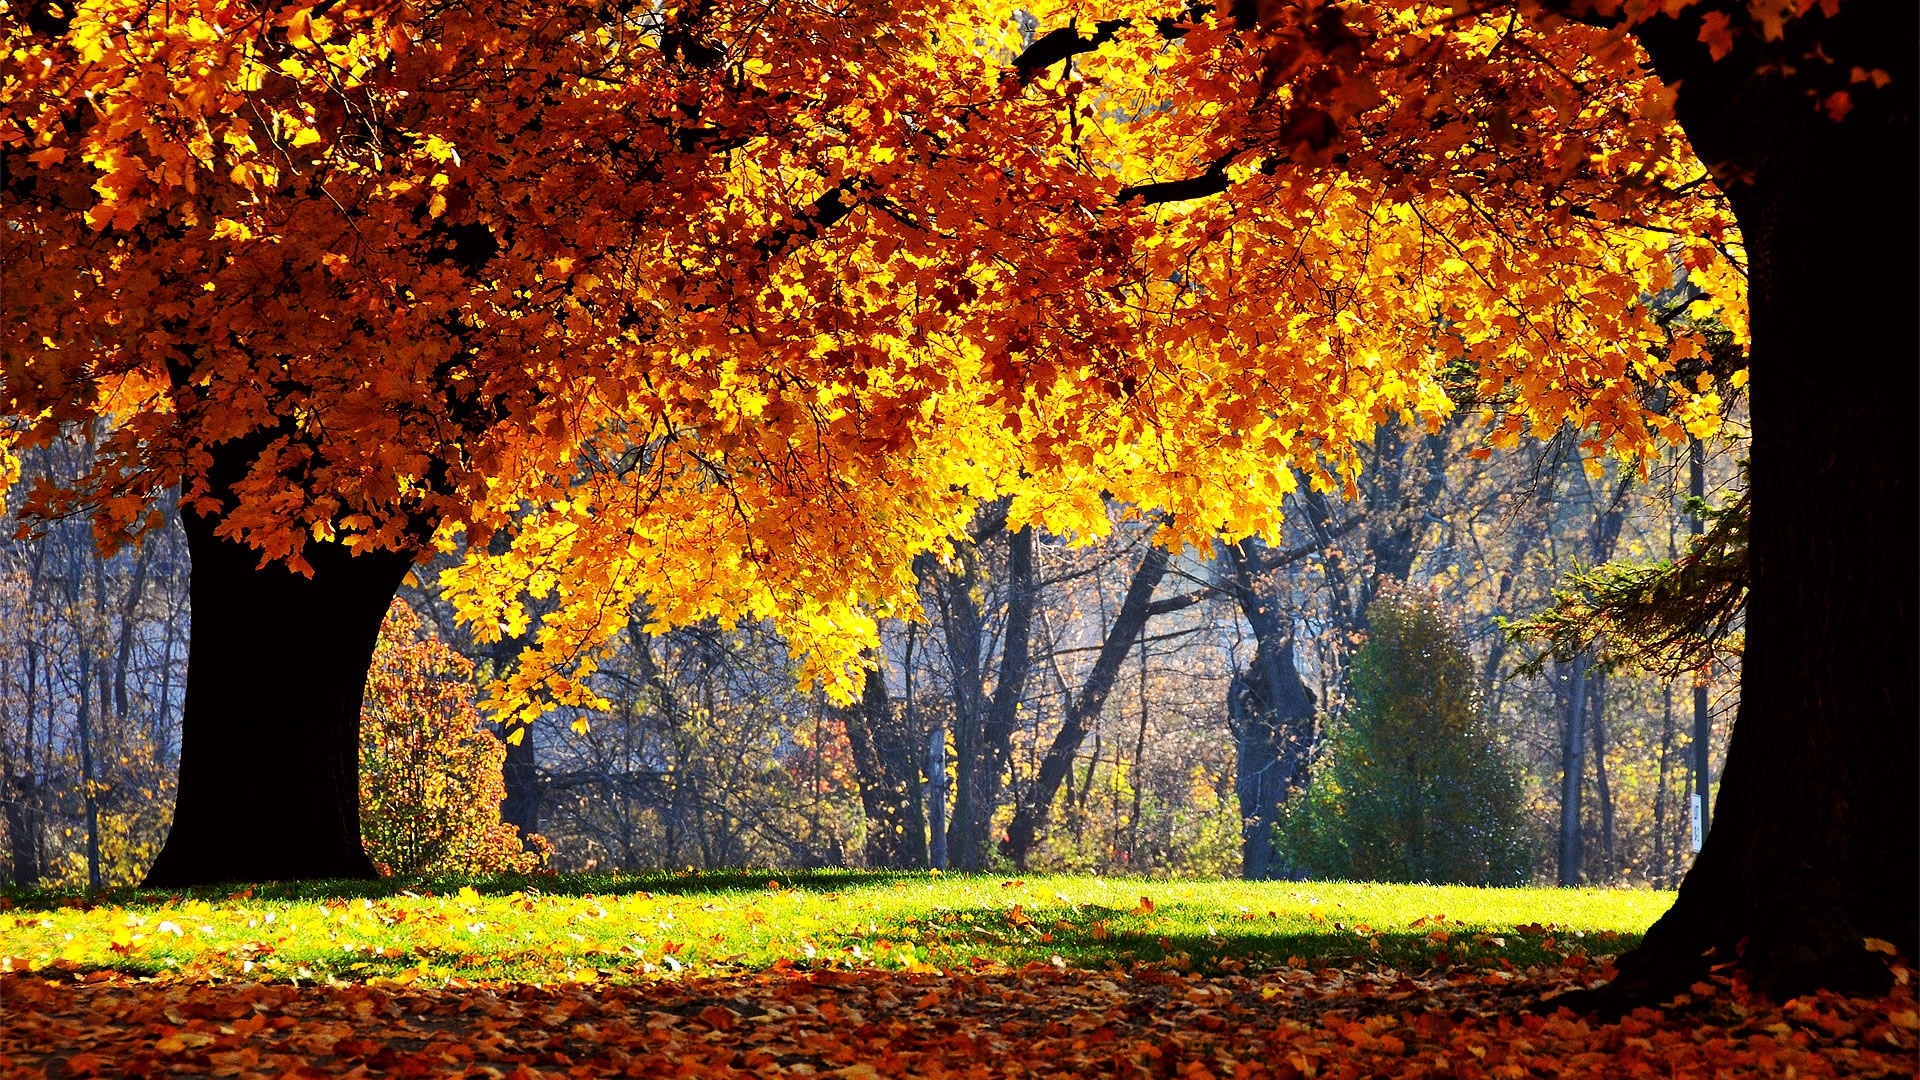 Autumn colors over trees for 1920 x 1080 HDTV 1080p resolution